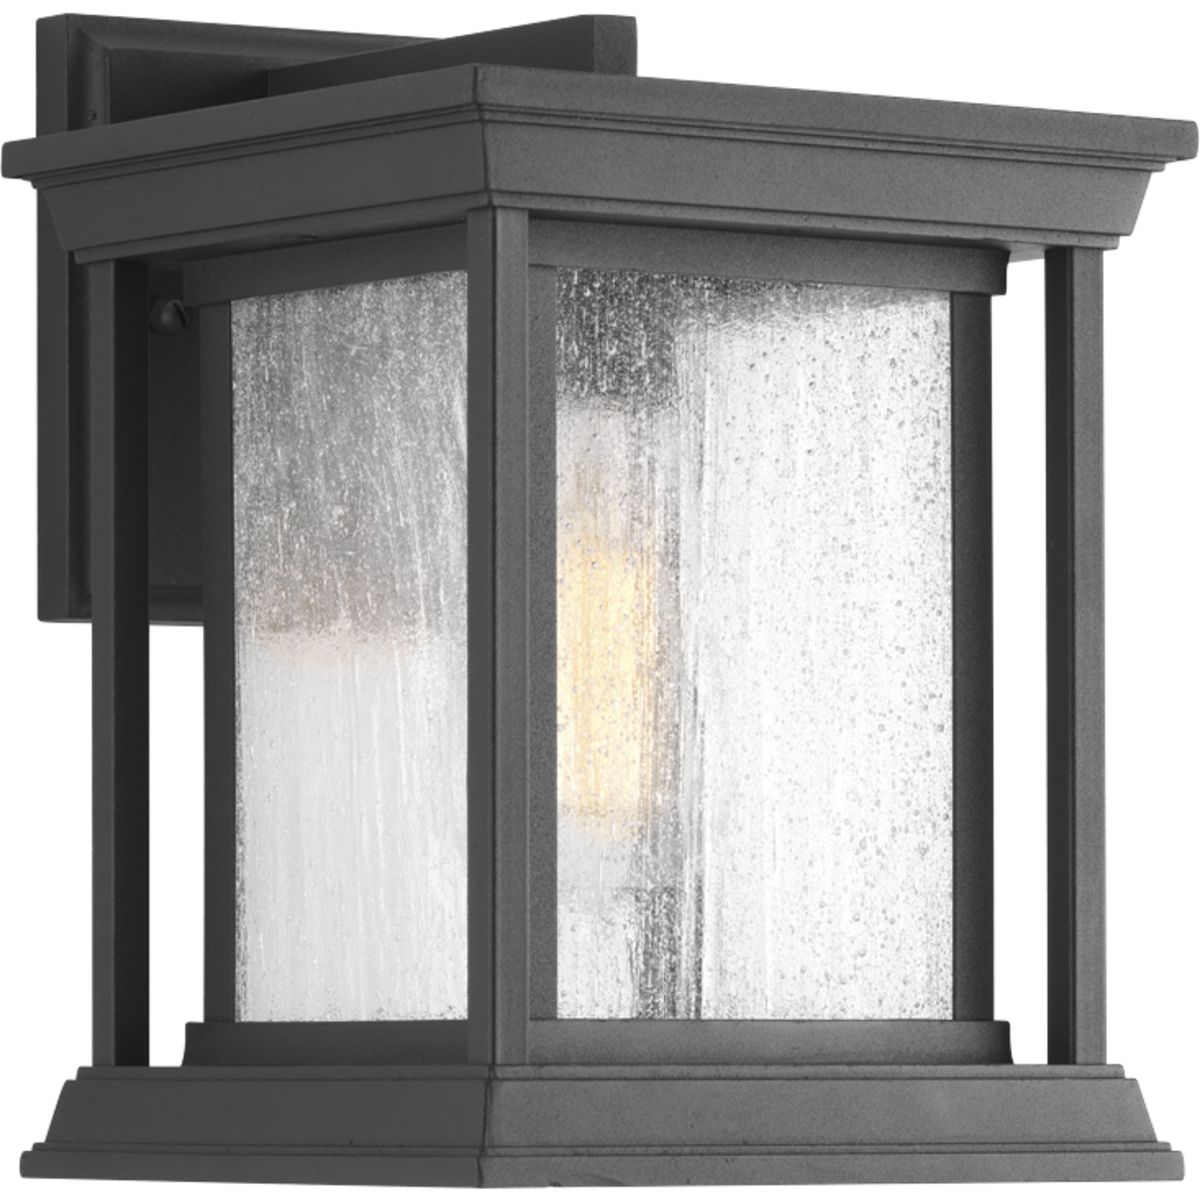 Endicott Collection One-Light Small Wall Lantern | P5605-31 